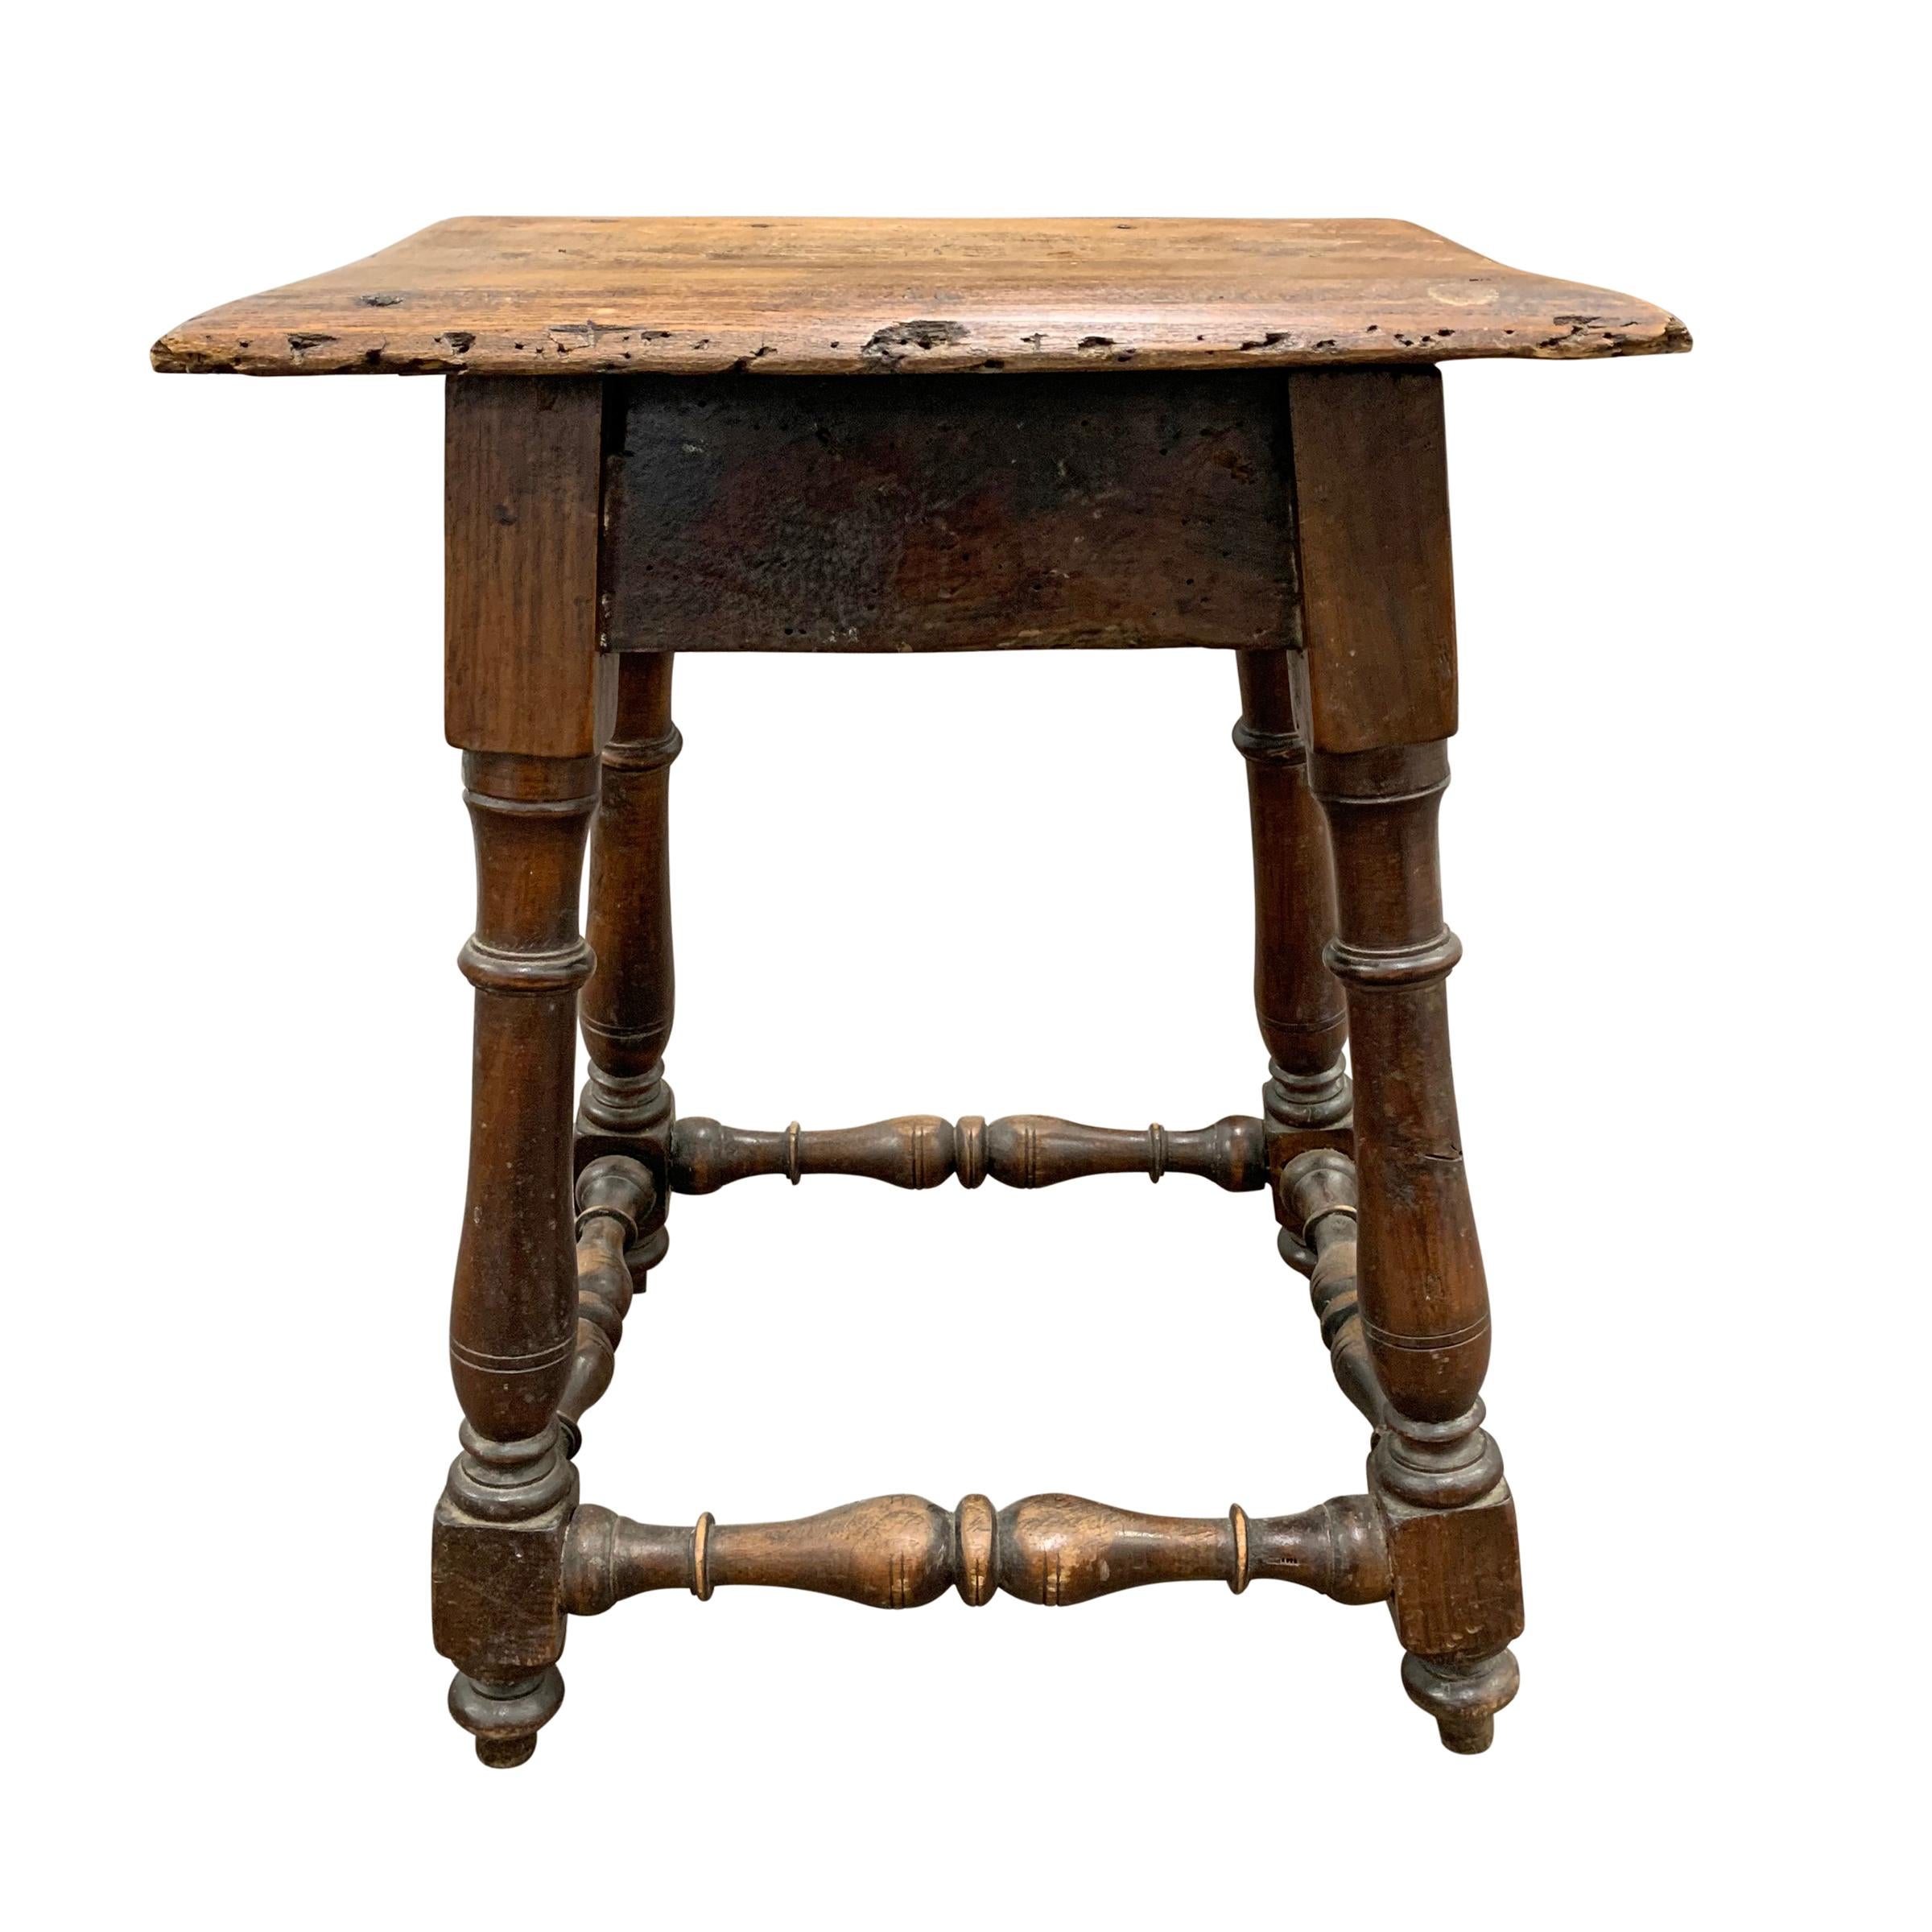 A beautiful early 19th century English pub stool with elaborately turned legs and stretchers showing two centuries of wear and patina.